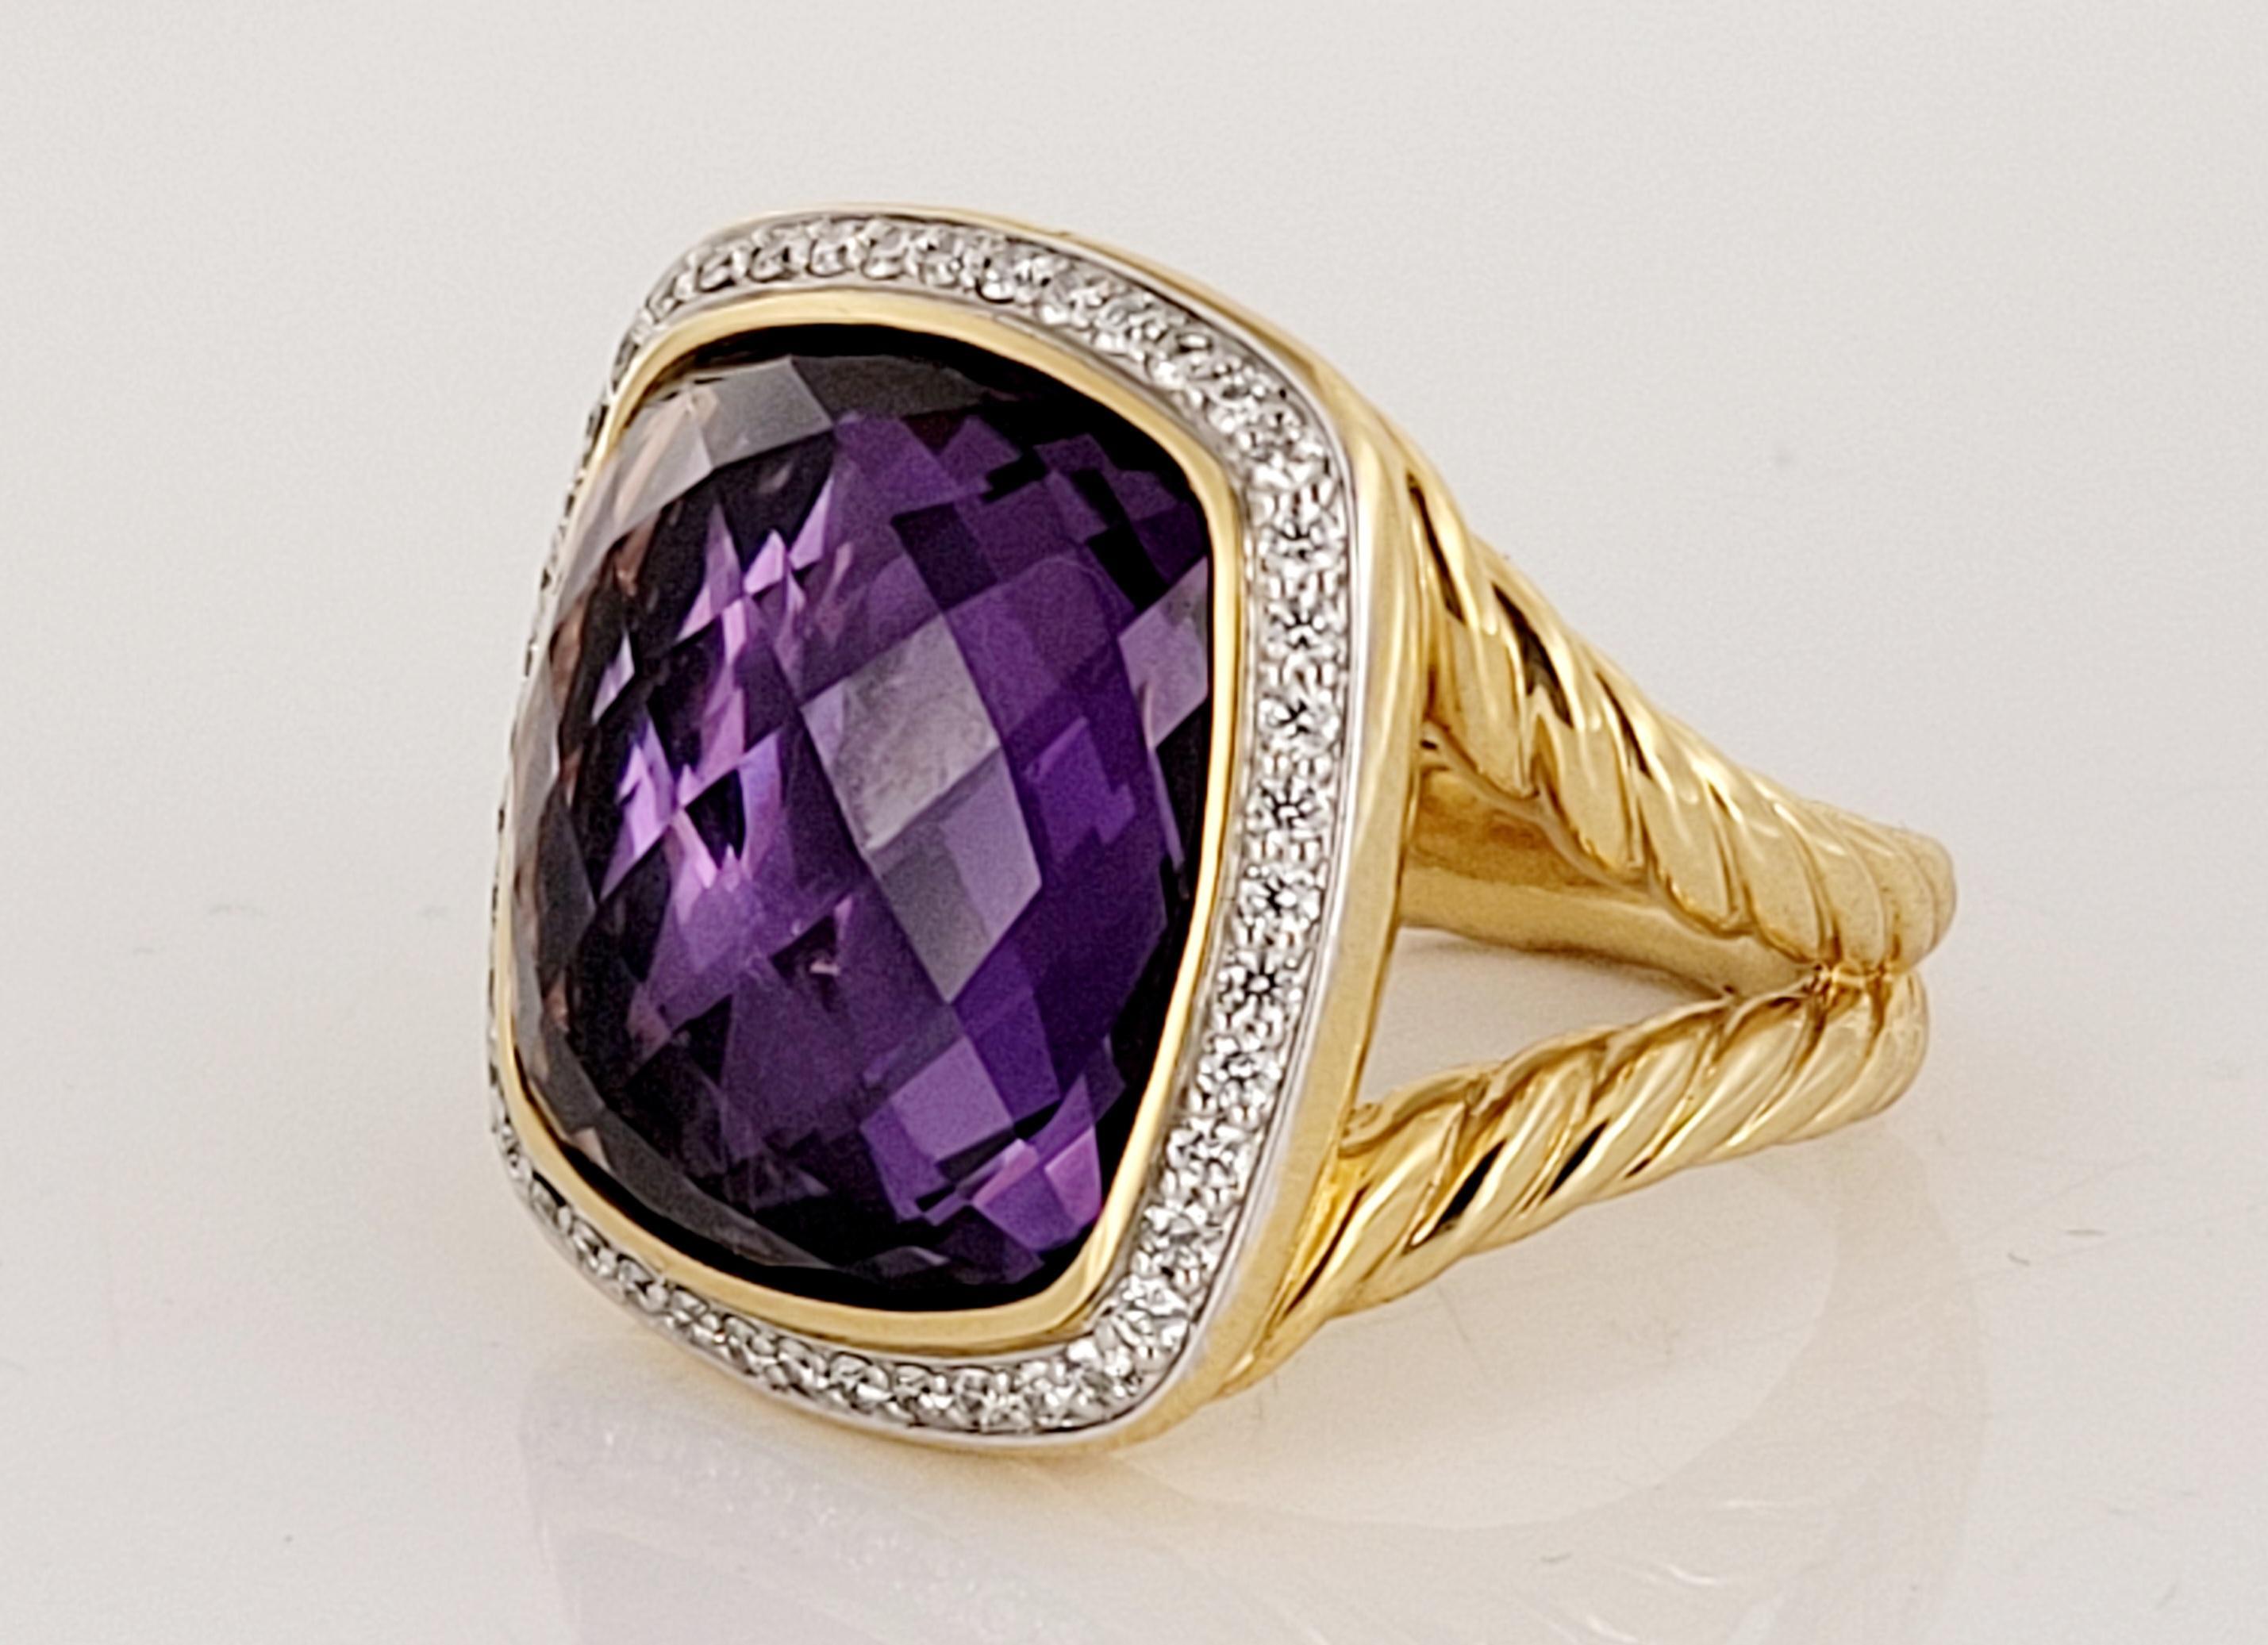 Round Cut David Yurman Albion Ring with Amethyst and Diamonds in 18k Gold